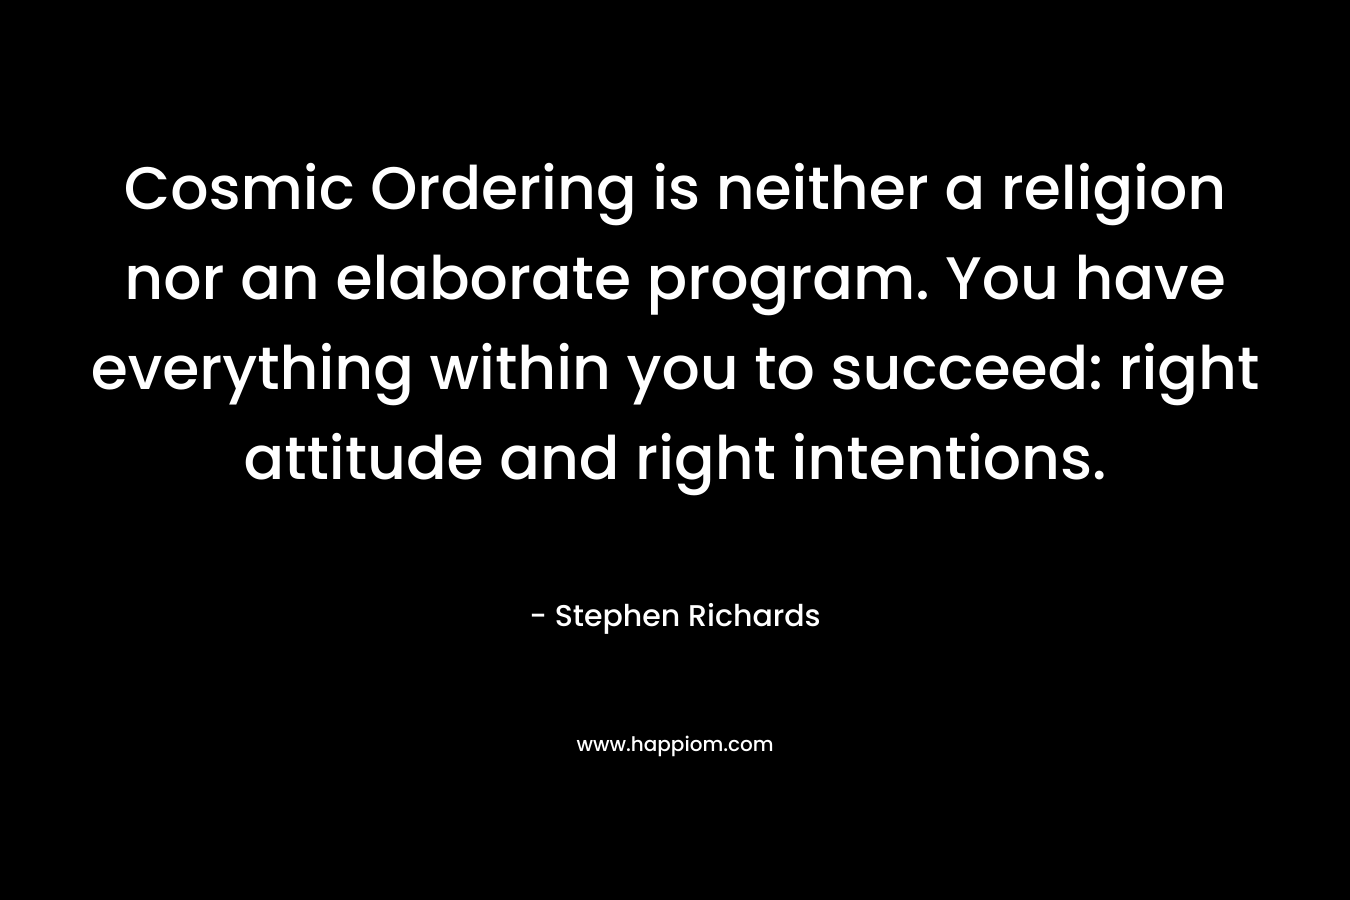 Cosmic Ordering is neither a religion nor an elaborate program. You have everything within you to succeed: right attitude and right intentions.